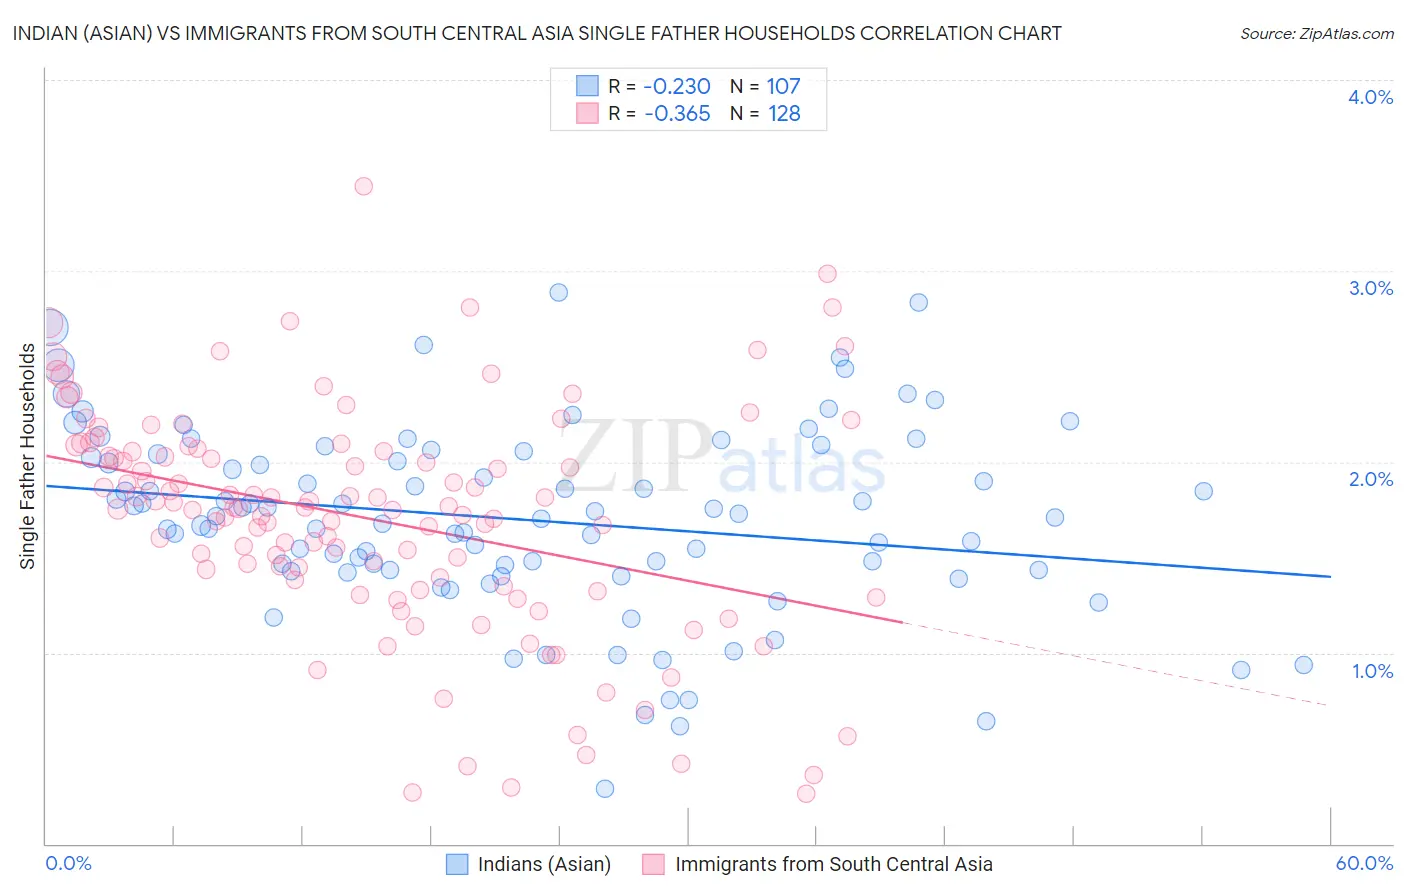 Indian (Asian) vs Immigrants from South Central Asia Single Father Households